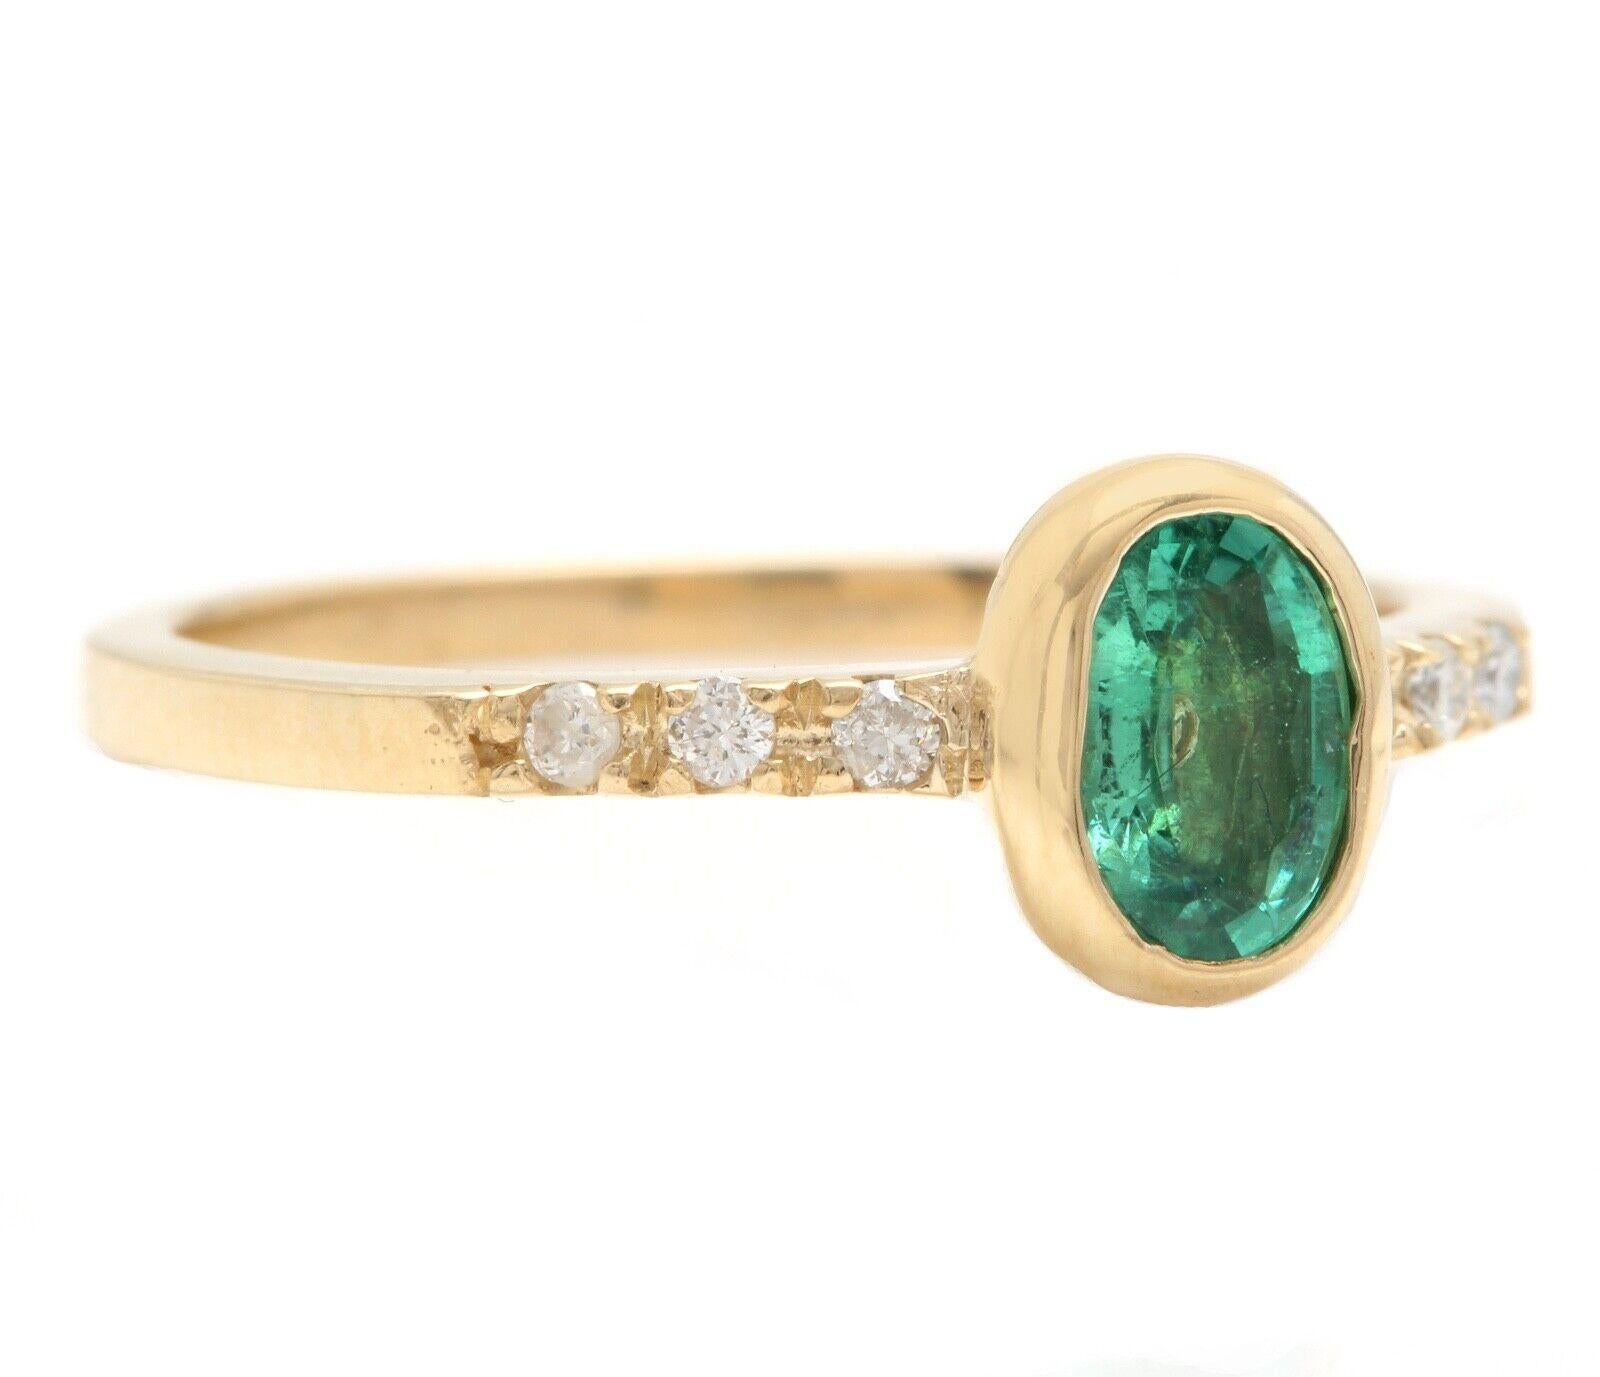 Awesome Natural Emerald and Diamond 14K Solid Yellow Gold Ring

Suggested Replacement Value: $3,000.00

Total Natural Green Emerald Weight is: Approx. 0.50 Carats (transparent)

Natural Round Diamonds Weight: Approx. 0.10 Carats (color G-H / Clarity